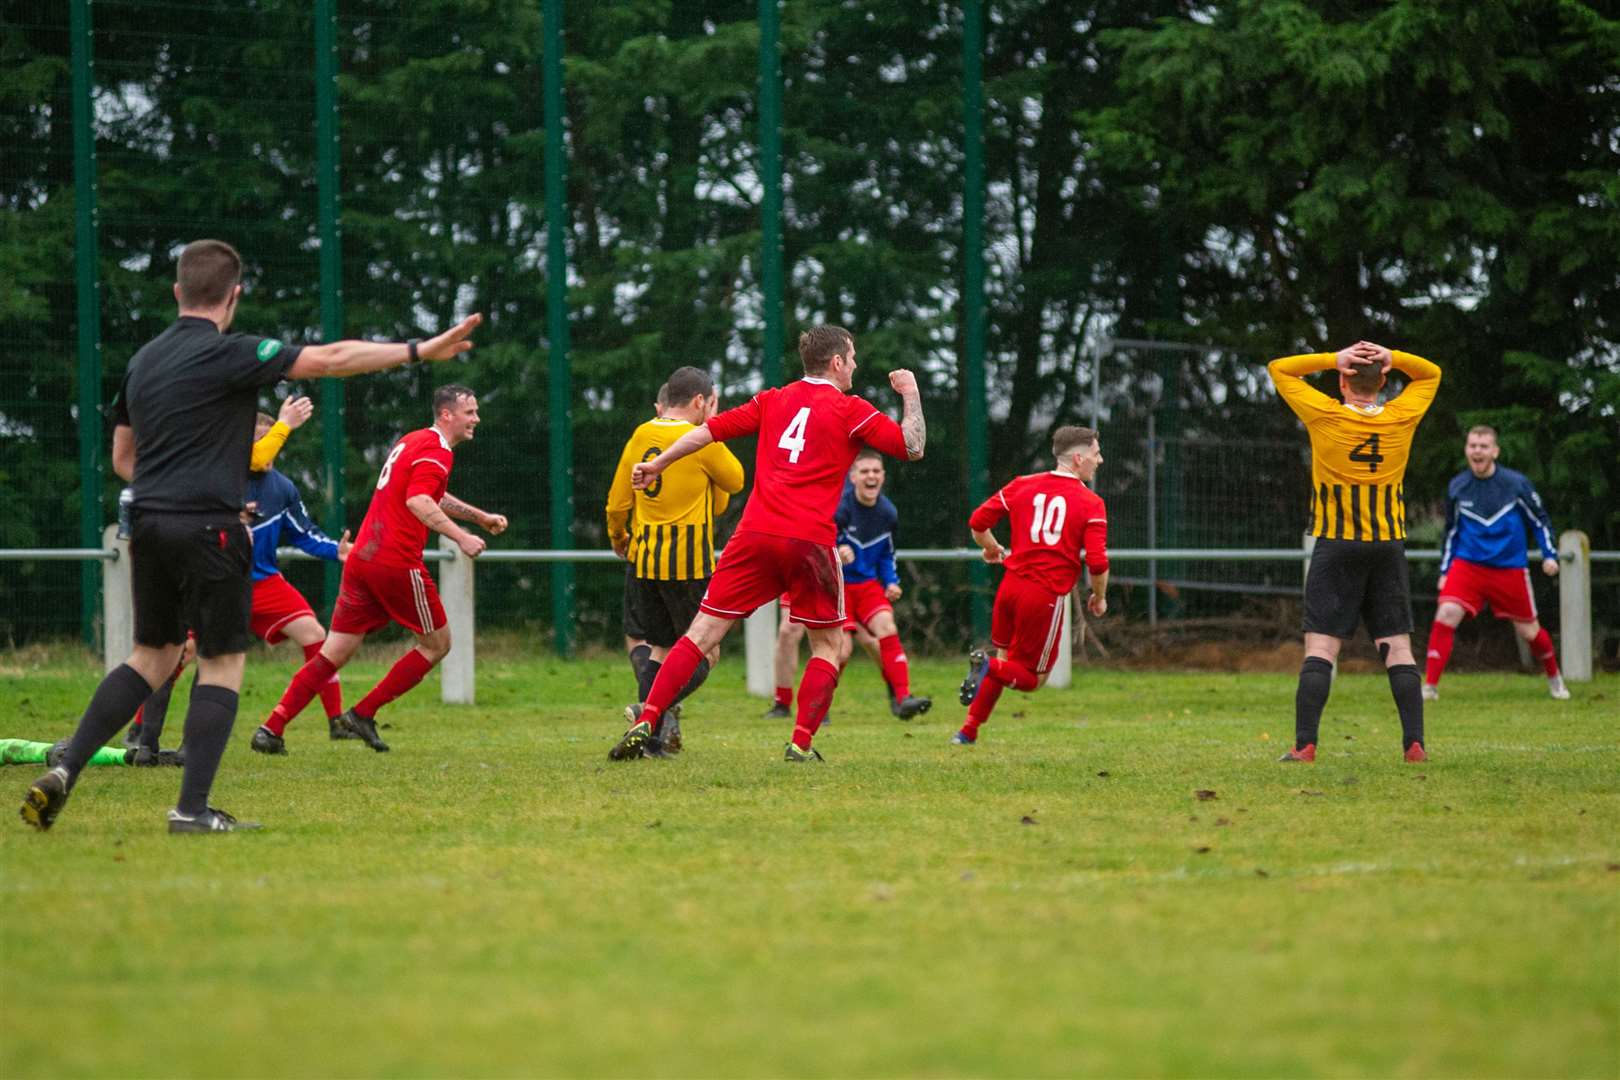 Delight for Forres Thistle as they score the second goal before half time. Picture: Daniel Forsyth